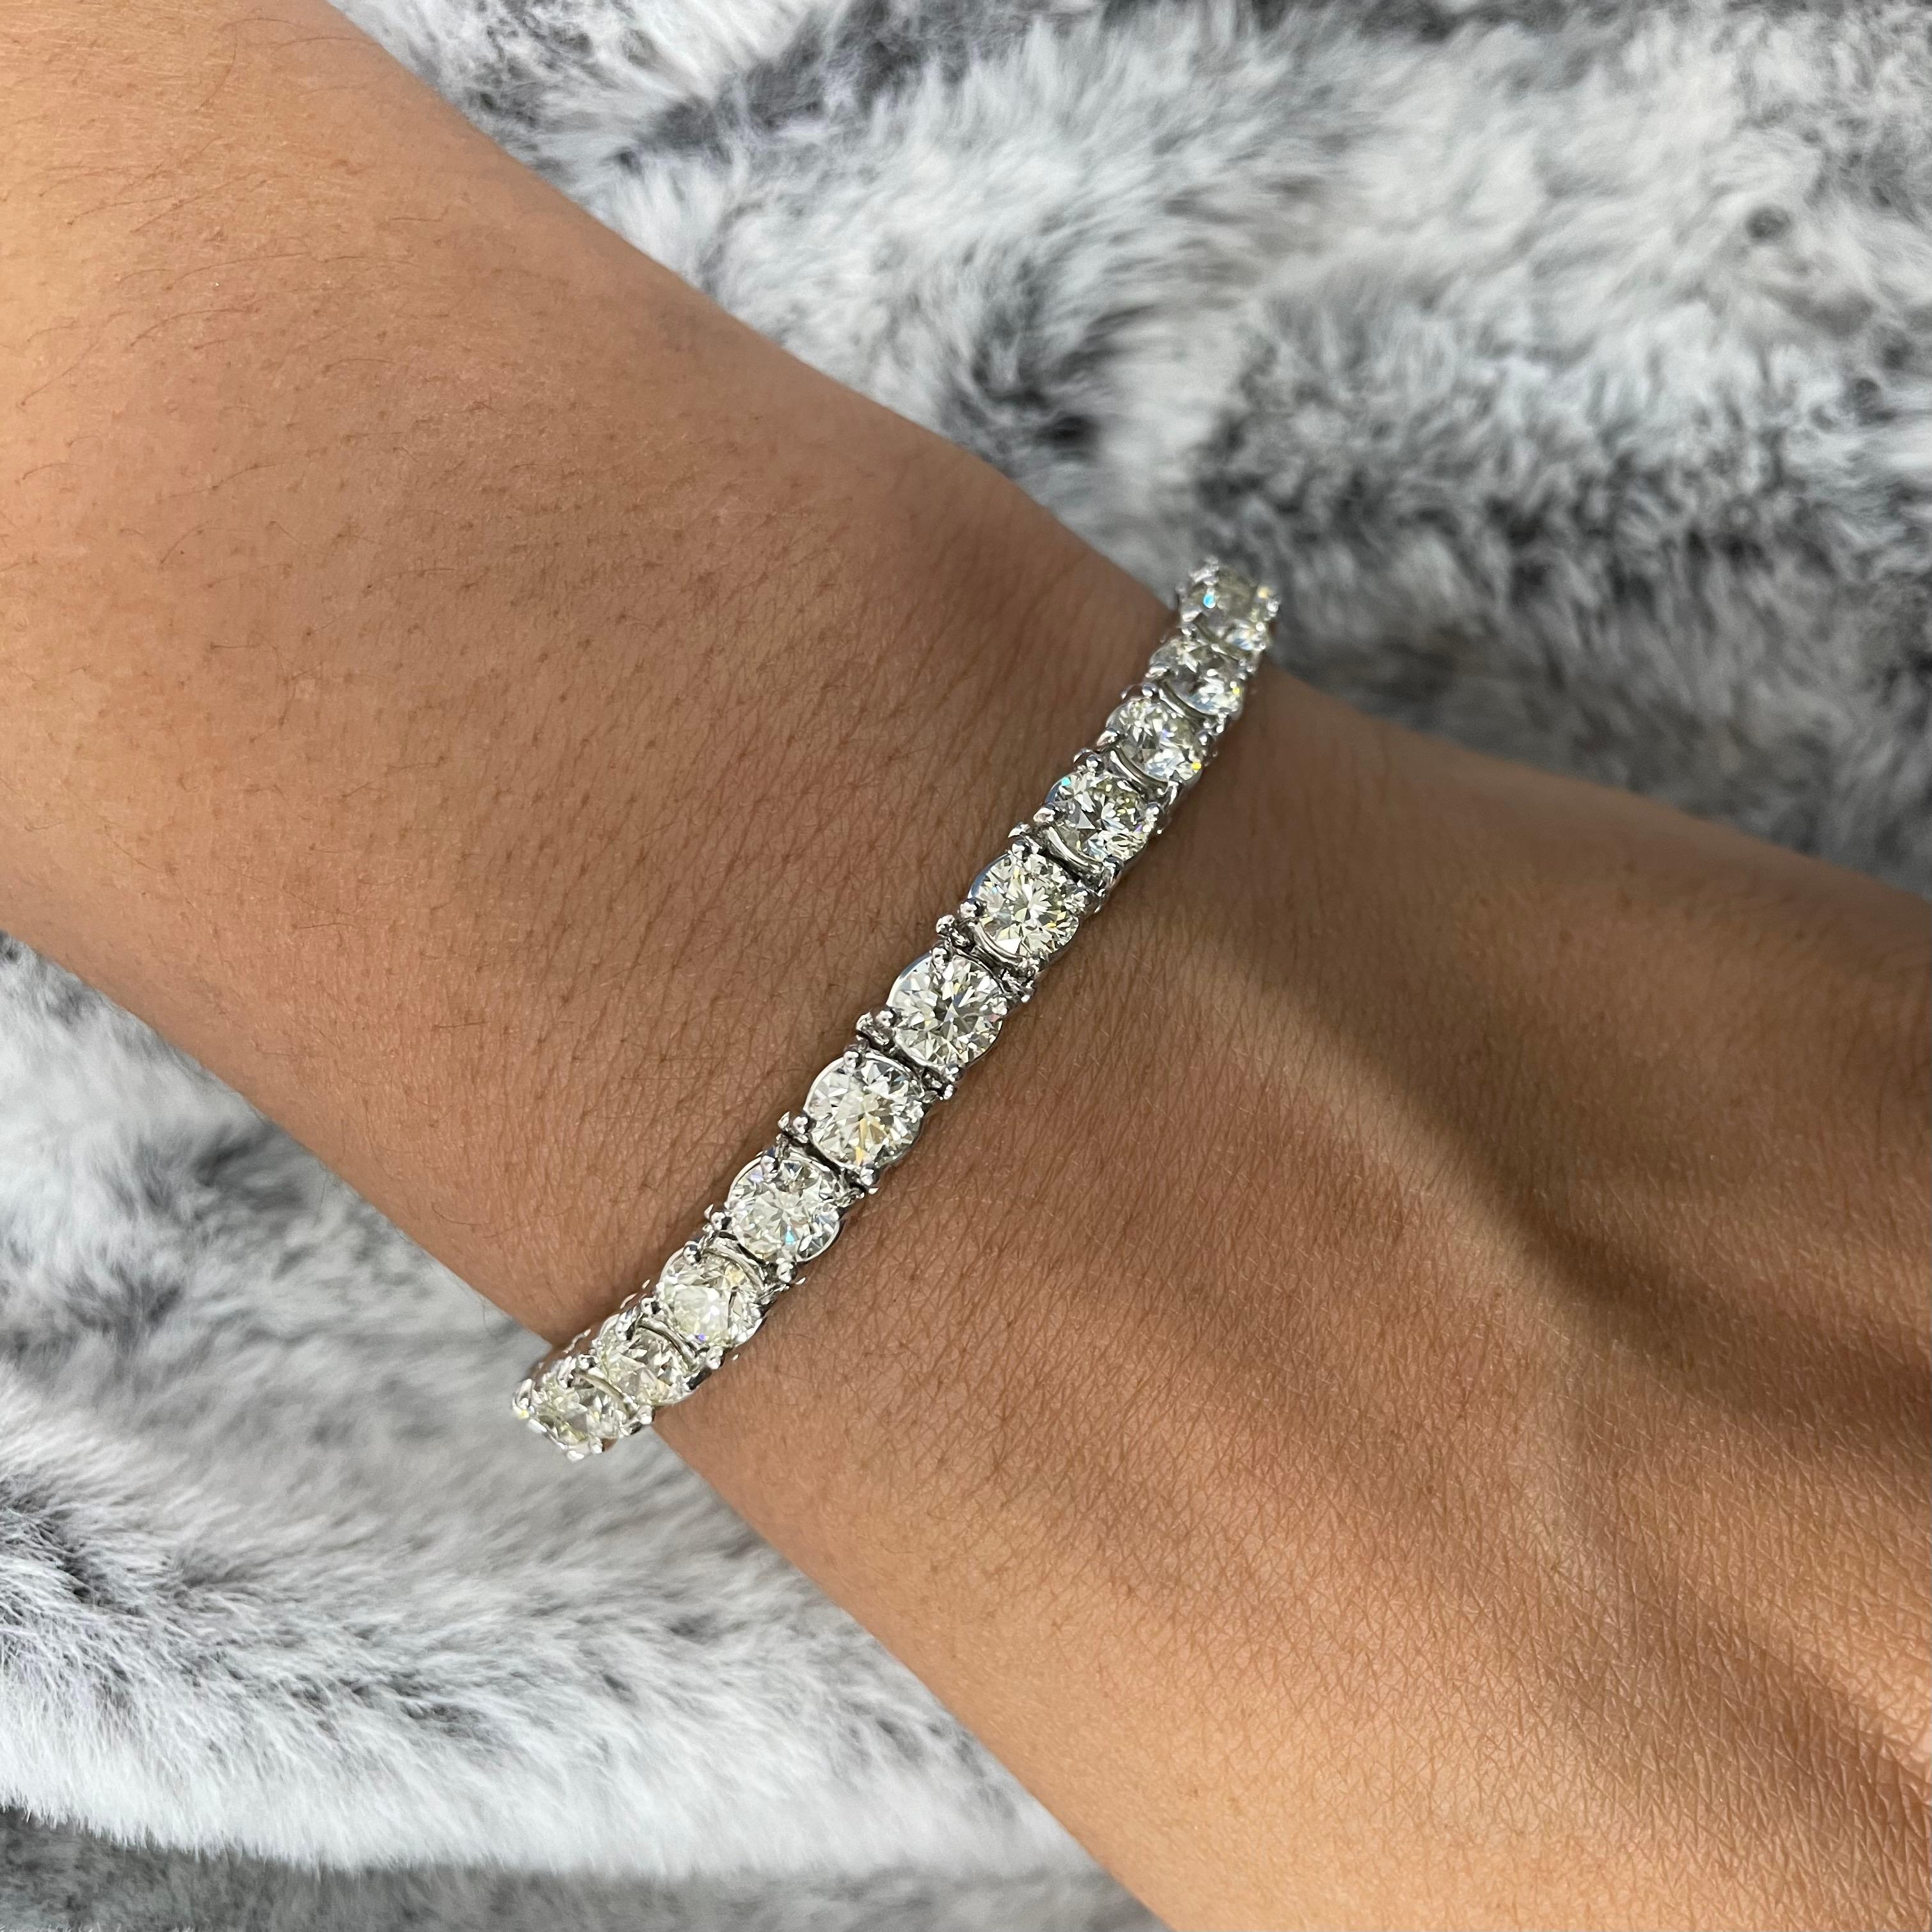 A diamond tennis bracelet is the most elegant and classic piece of evergreen jewelry. It is feminine, comfortable and accentuates a woman's wrist with brilliance and sparkles. All our bracelets have two locks for added security. 

Total Diamond